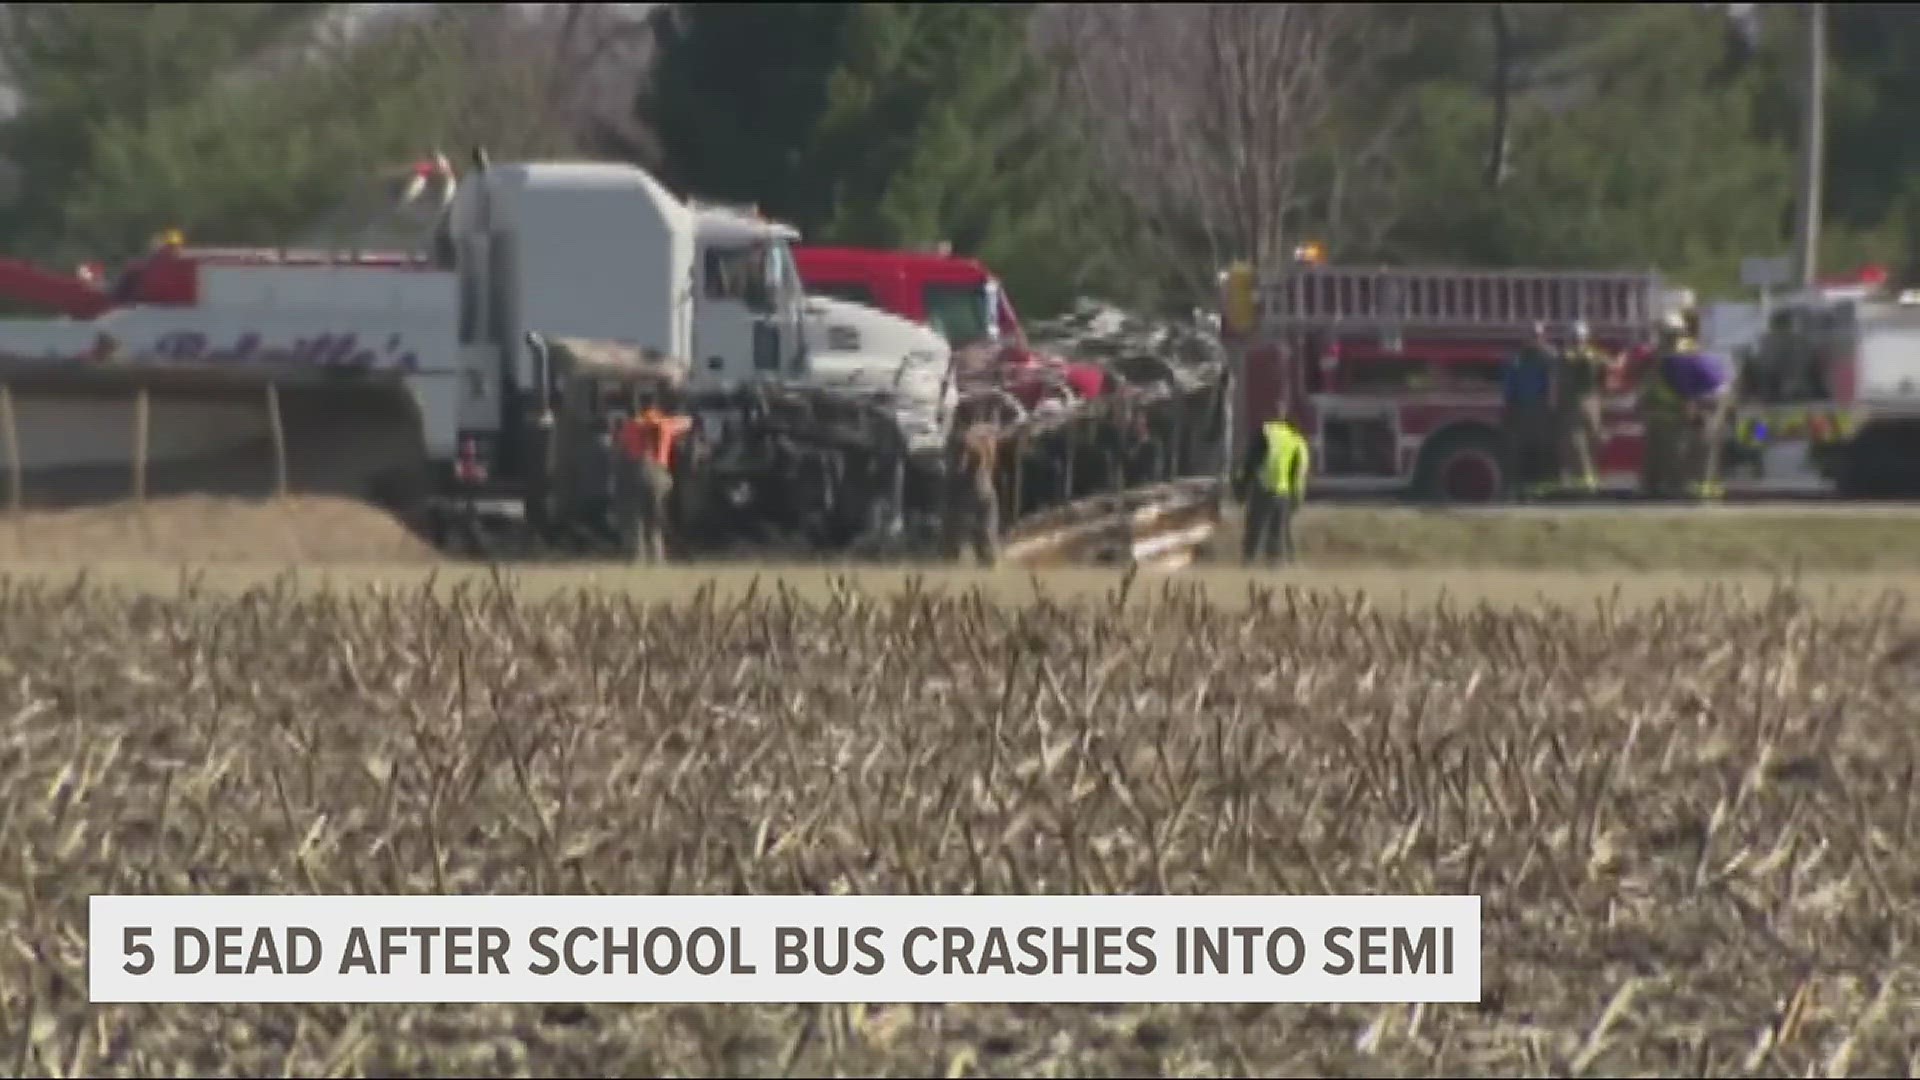 Two of the children who were killed were siblings. Another child, along with the bus driver and the driver of the semi it collided with also died.